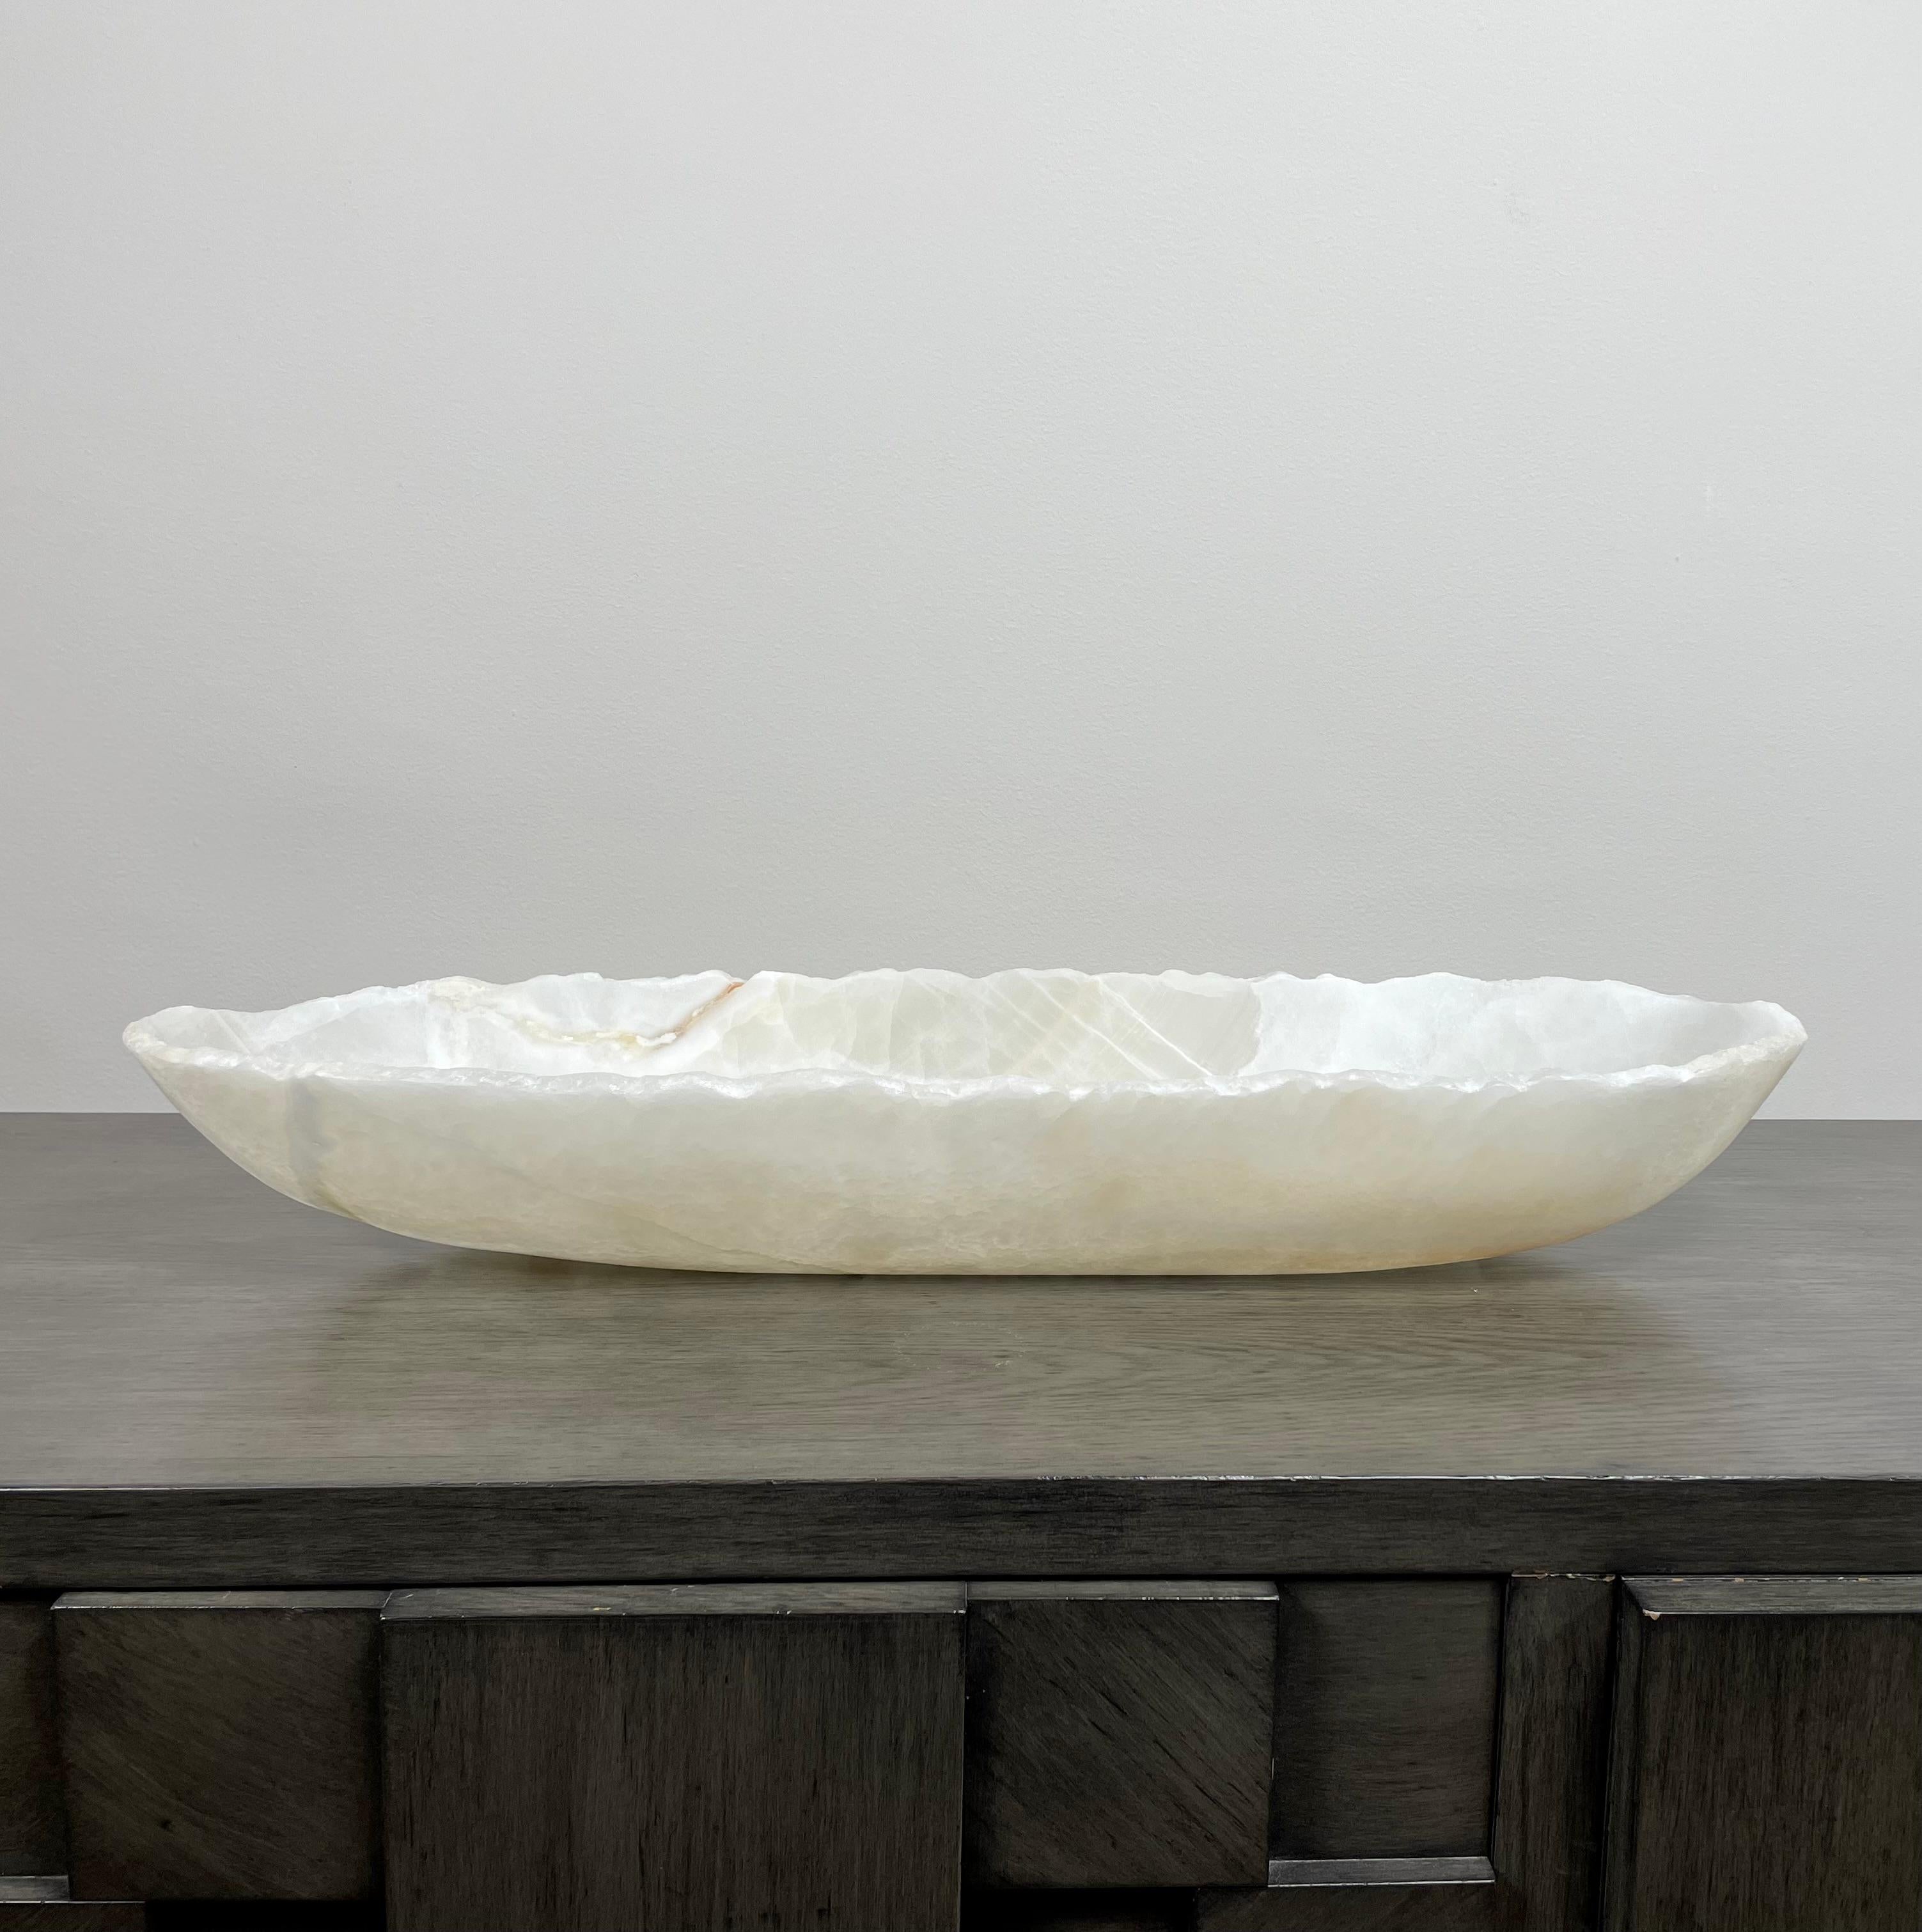 An elegant oblong medium onyx bowl. It has serene tones of white and off white with some veining in earth tones. This one of a kind decorative vessel is meticulously hand-carved from a single piece of onyx by skilled artists to reveal its' inherent